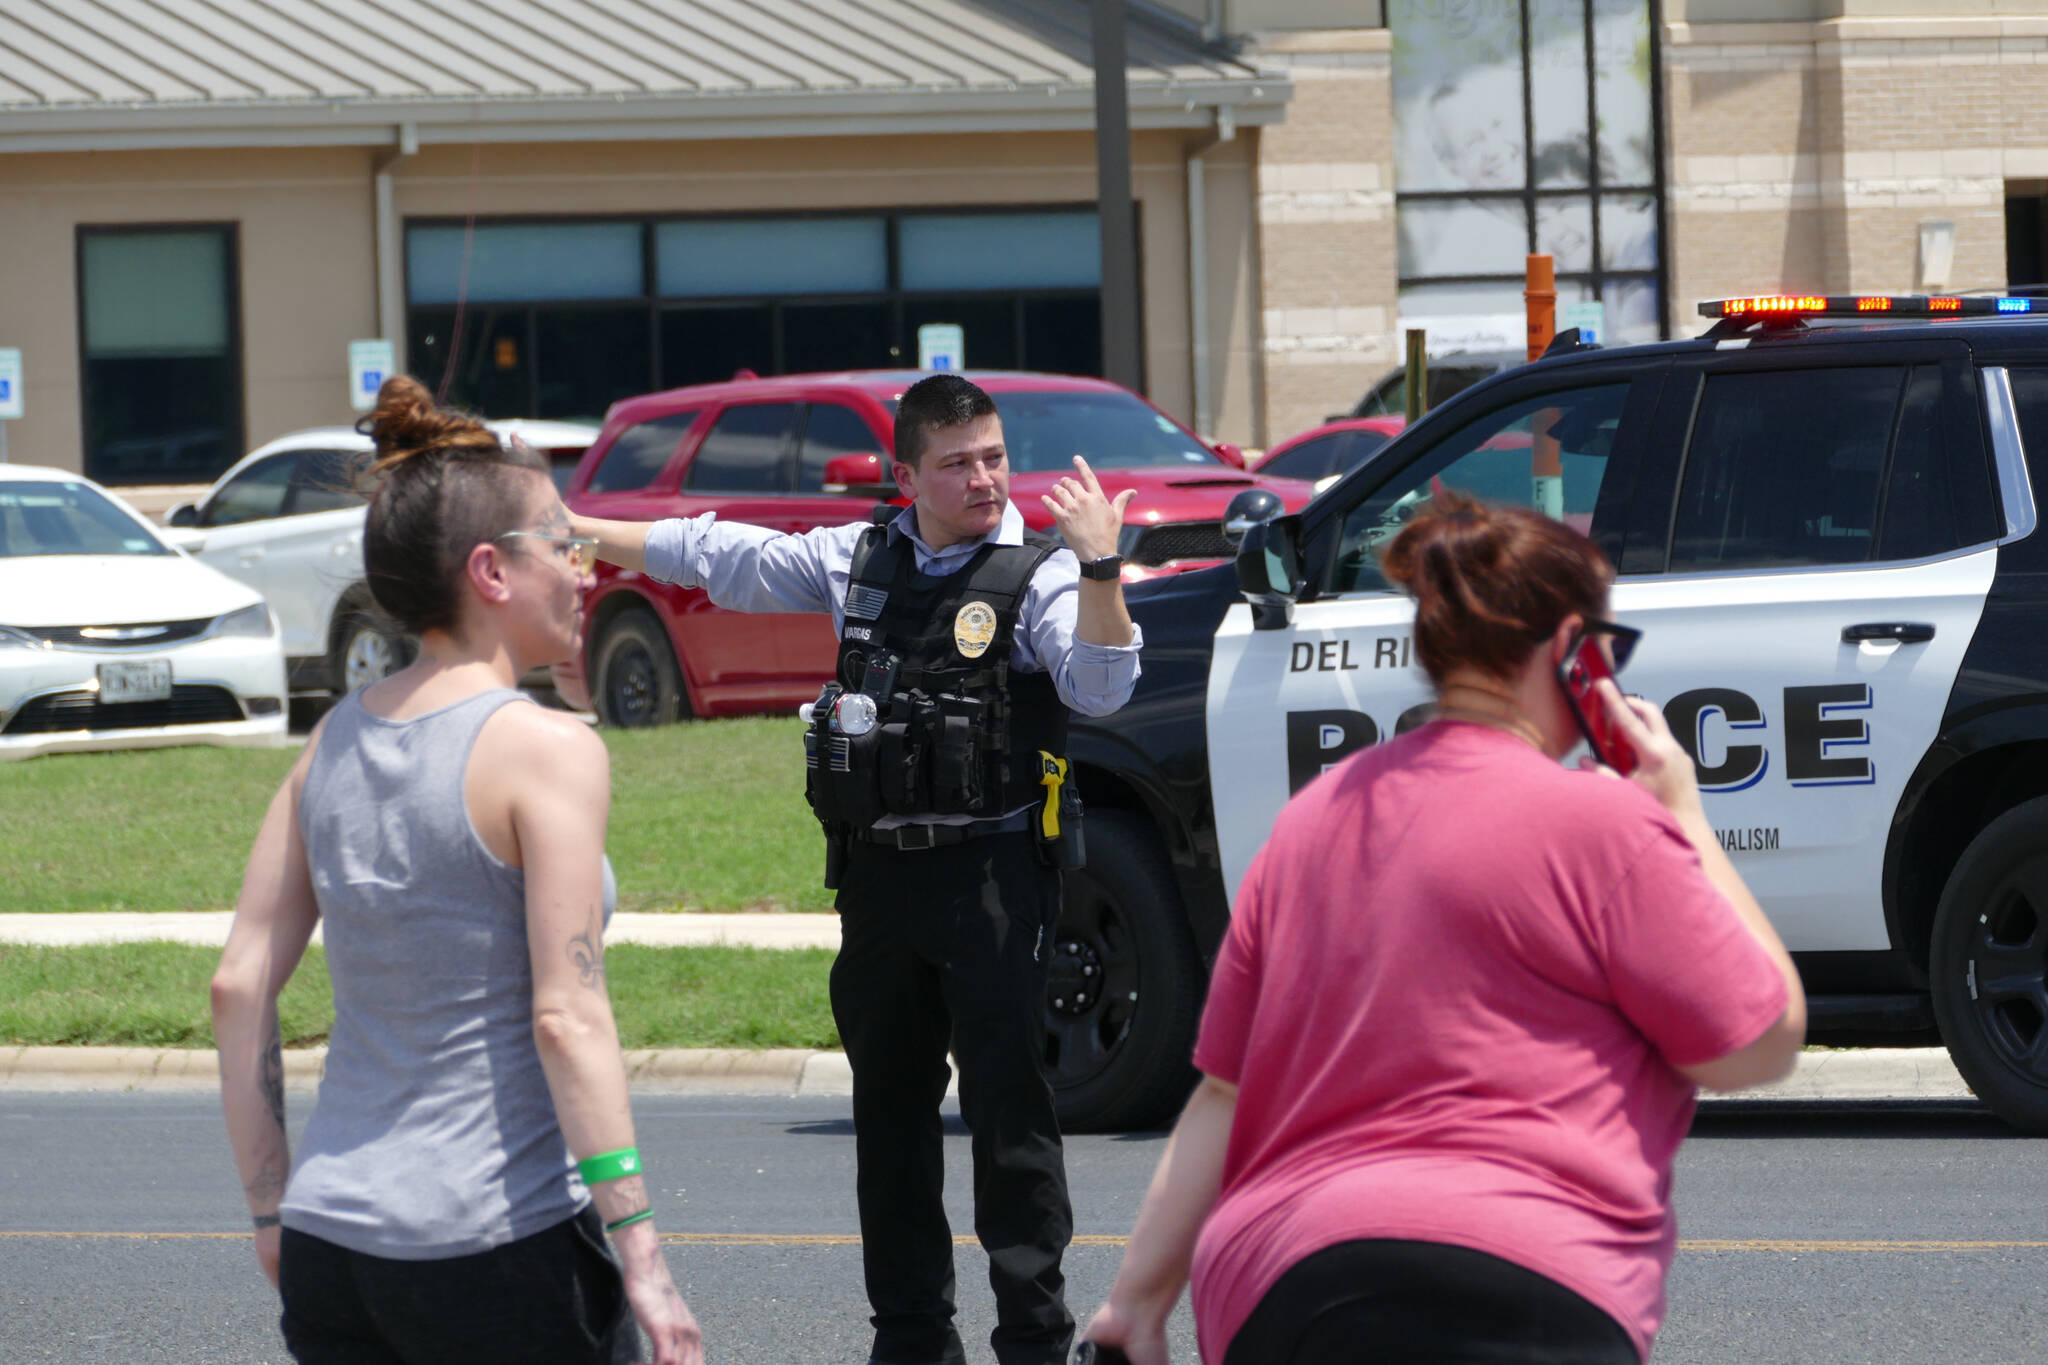 A law enforcement officer helps people cross the street at Uvalde Memorial Hospital after a shooting was reported earlier in the day at Robb Elementary School on Tuesday in Uvalde, Texas. (Billy Calzada/The San Antonio Express-News via AP)